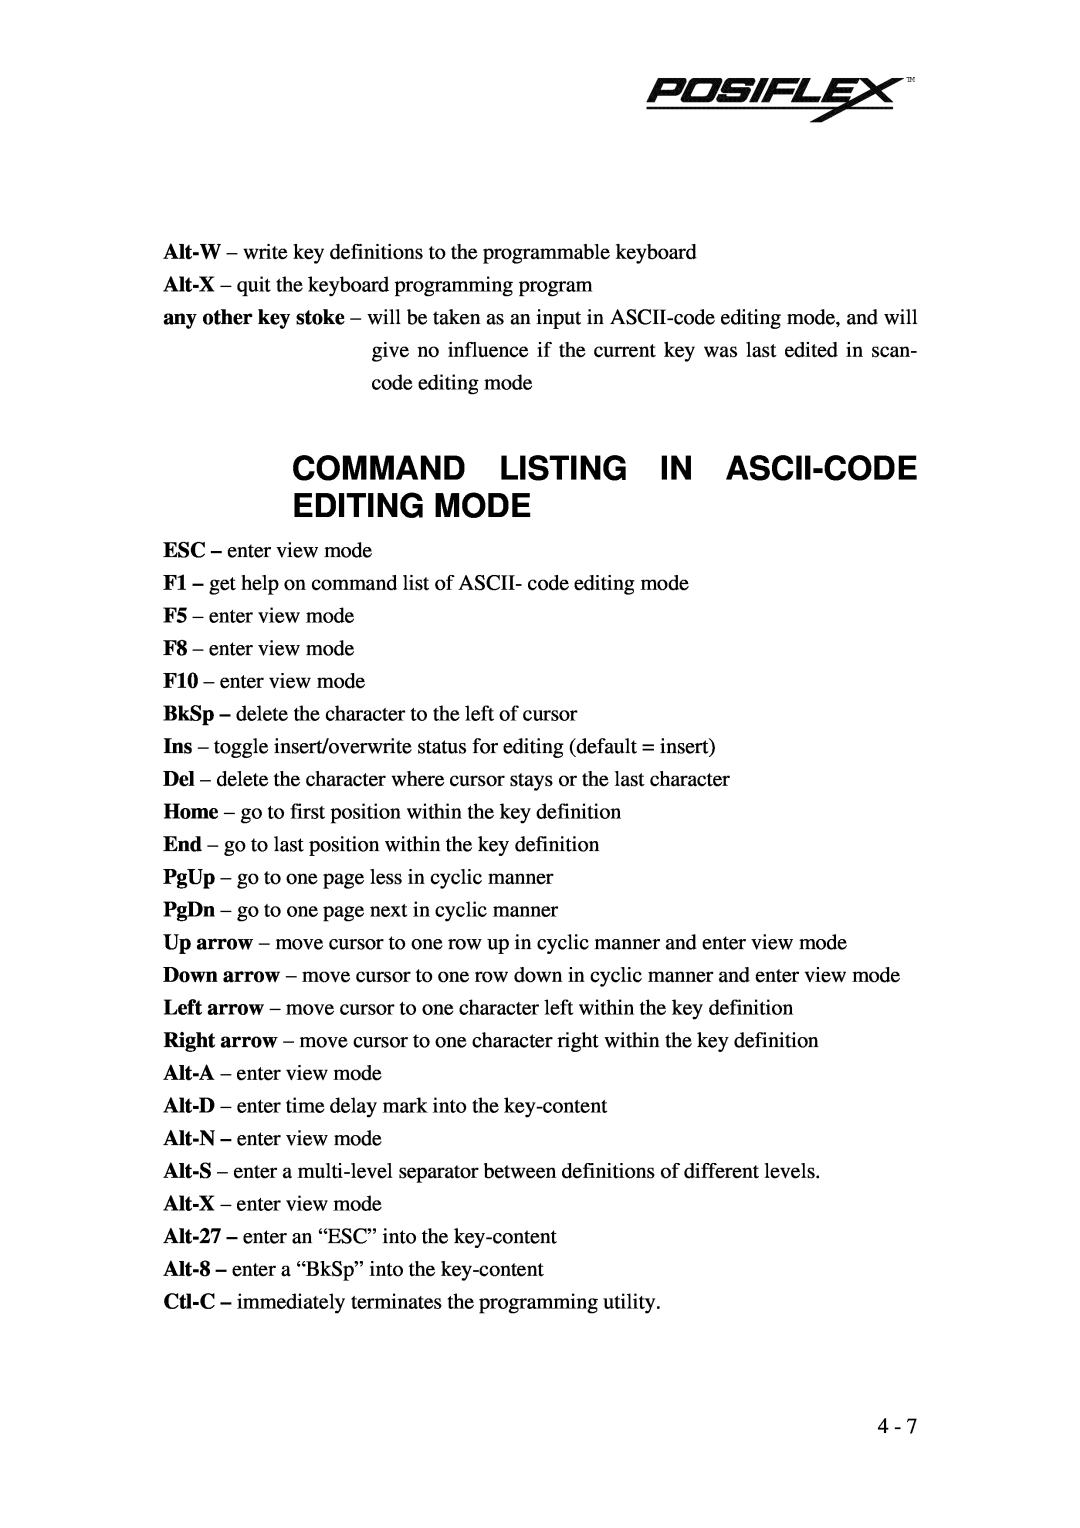 POSIFLEX Business Machines PST KB136 manual Command Listing In Ascii-Code Editing Mode 